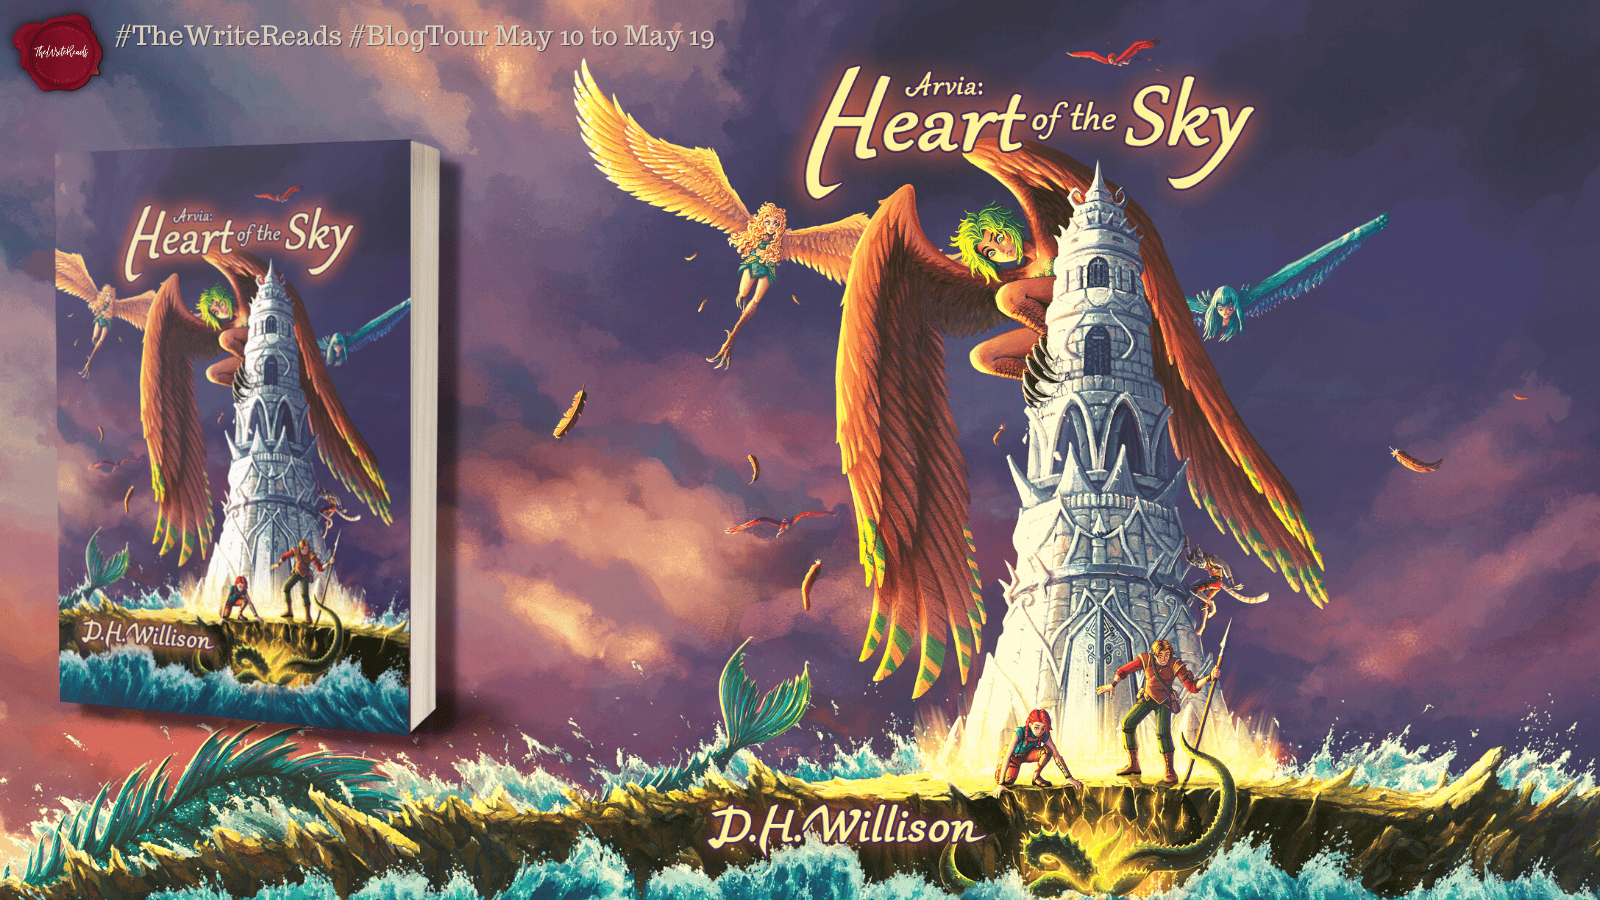 Heart of the Sky (Arvia Series, Book 3) by DH Willison | Book Review